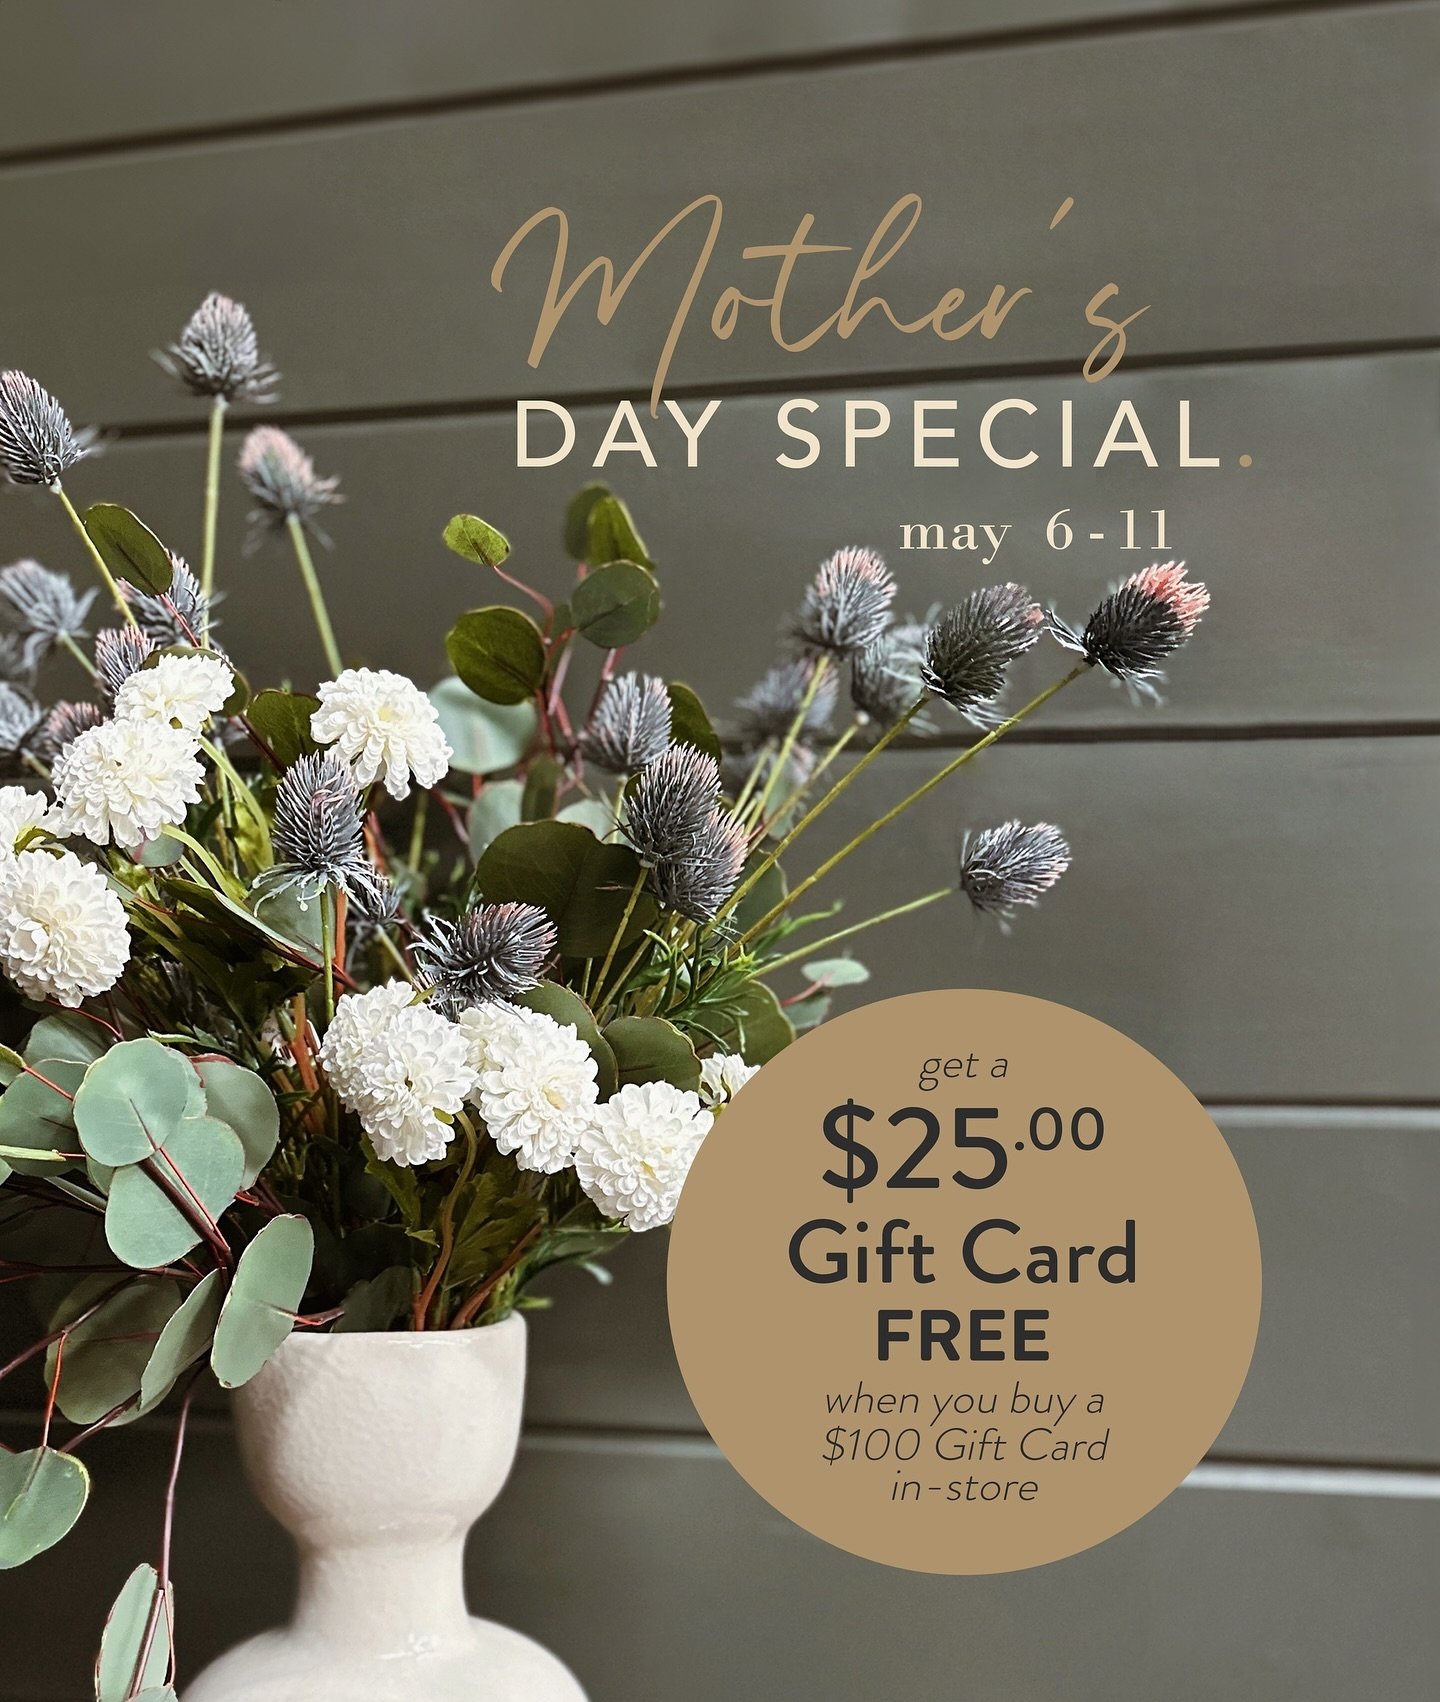 💐 Mother&rsquo;s Day Gift Card Special 💐 
at bfearless. at HOME
[ May 6 - 11 ]

✨ get a $25 gift card FREE when you buy a $100 gift card in-store during the above dates! ✨

**Gift cards must be used after Mother&rsquo;s Day. Cannot be combined with